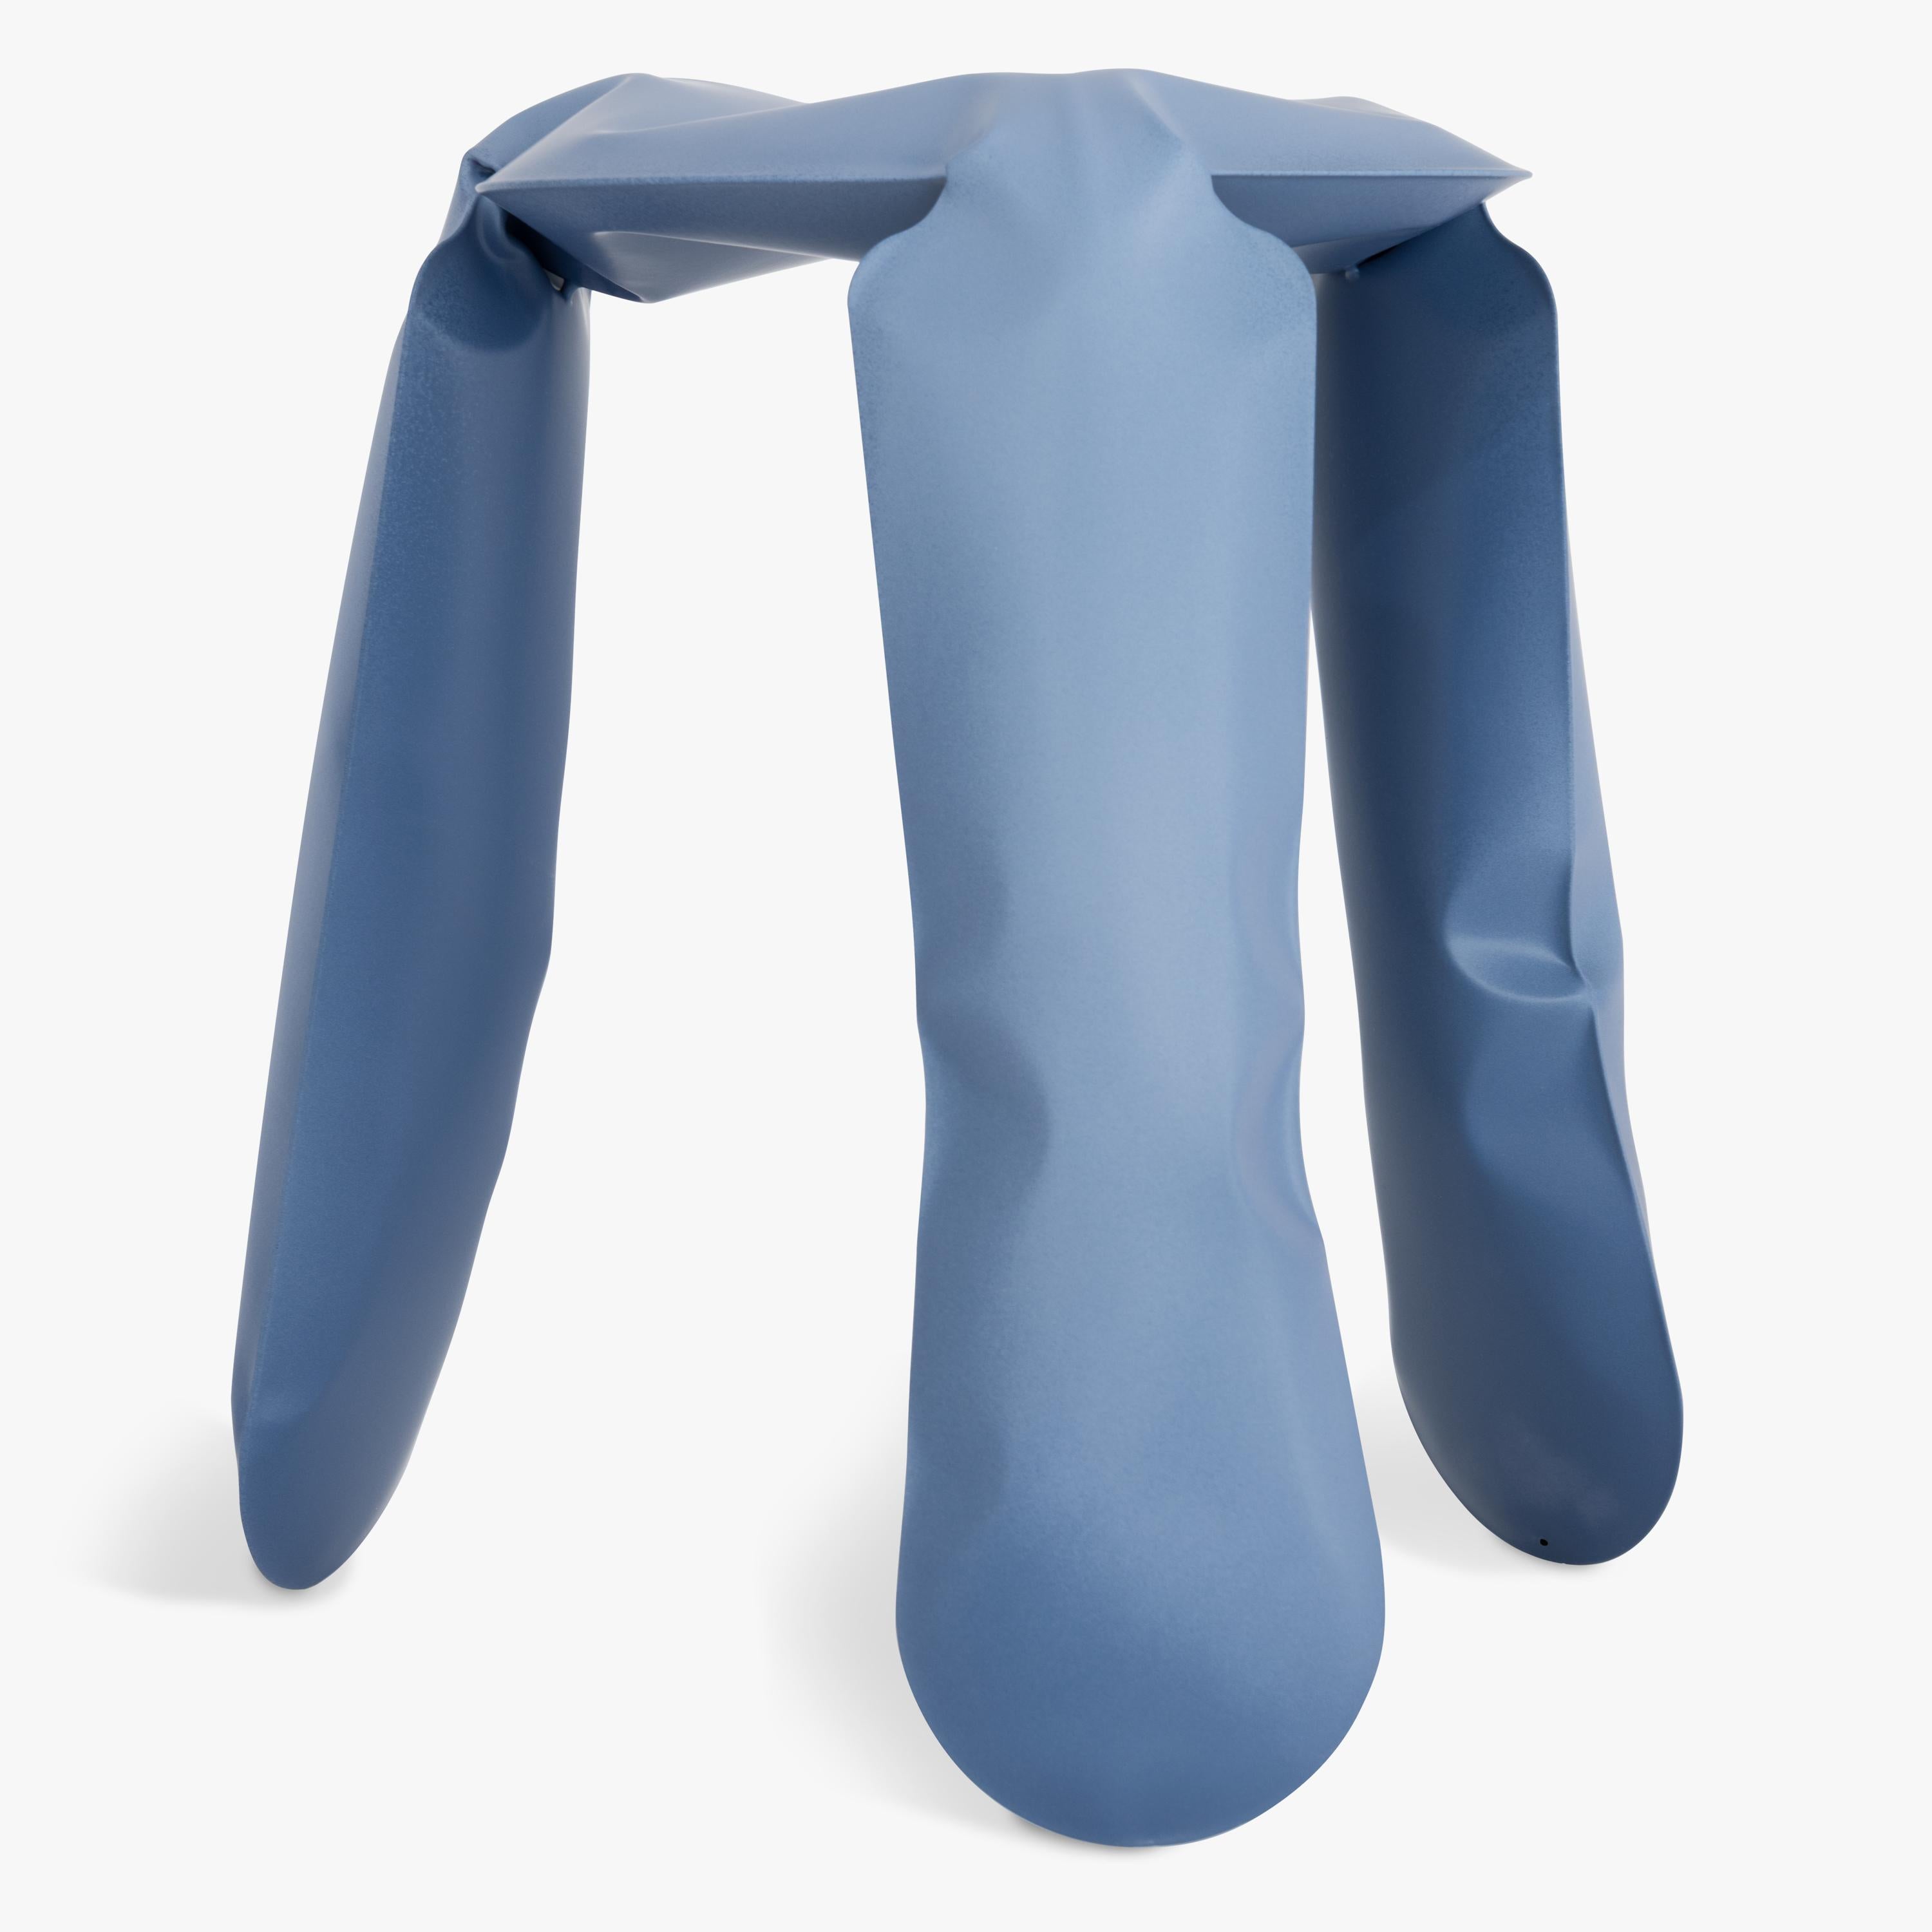 Blue Matt Plopp Standard Cotton Candy Stool by Zieta
Dimensions: D35 x H50 cm 
Material: steel
Available finishes: Also available in other sizes and colours.Please contact us.

Soft steel impressions
Challenging the material is one of the